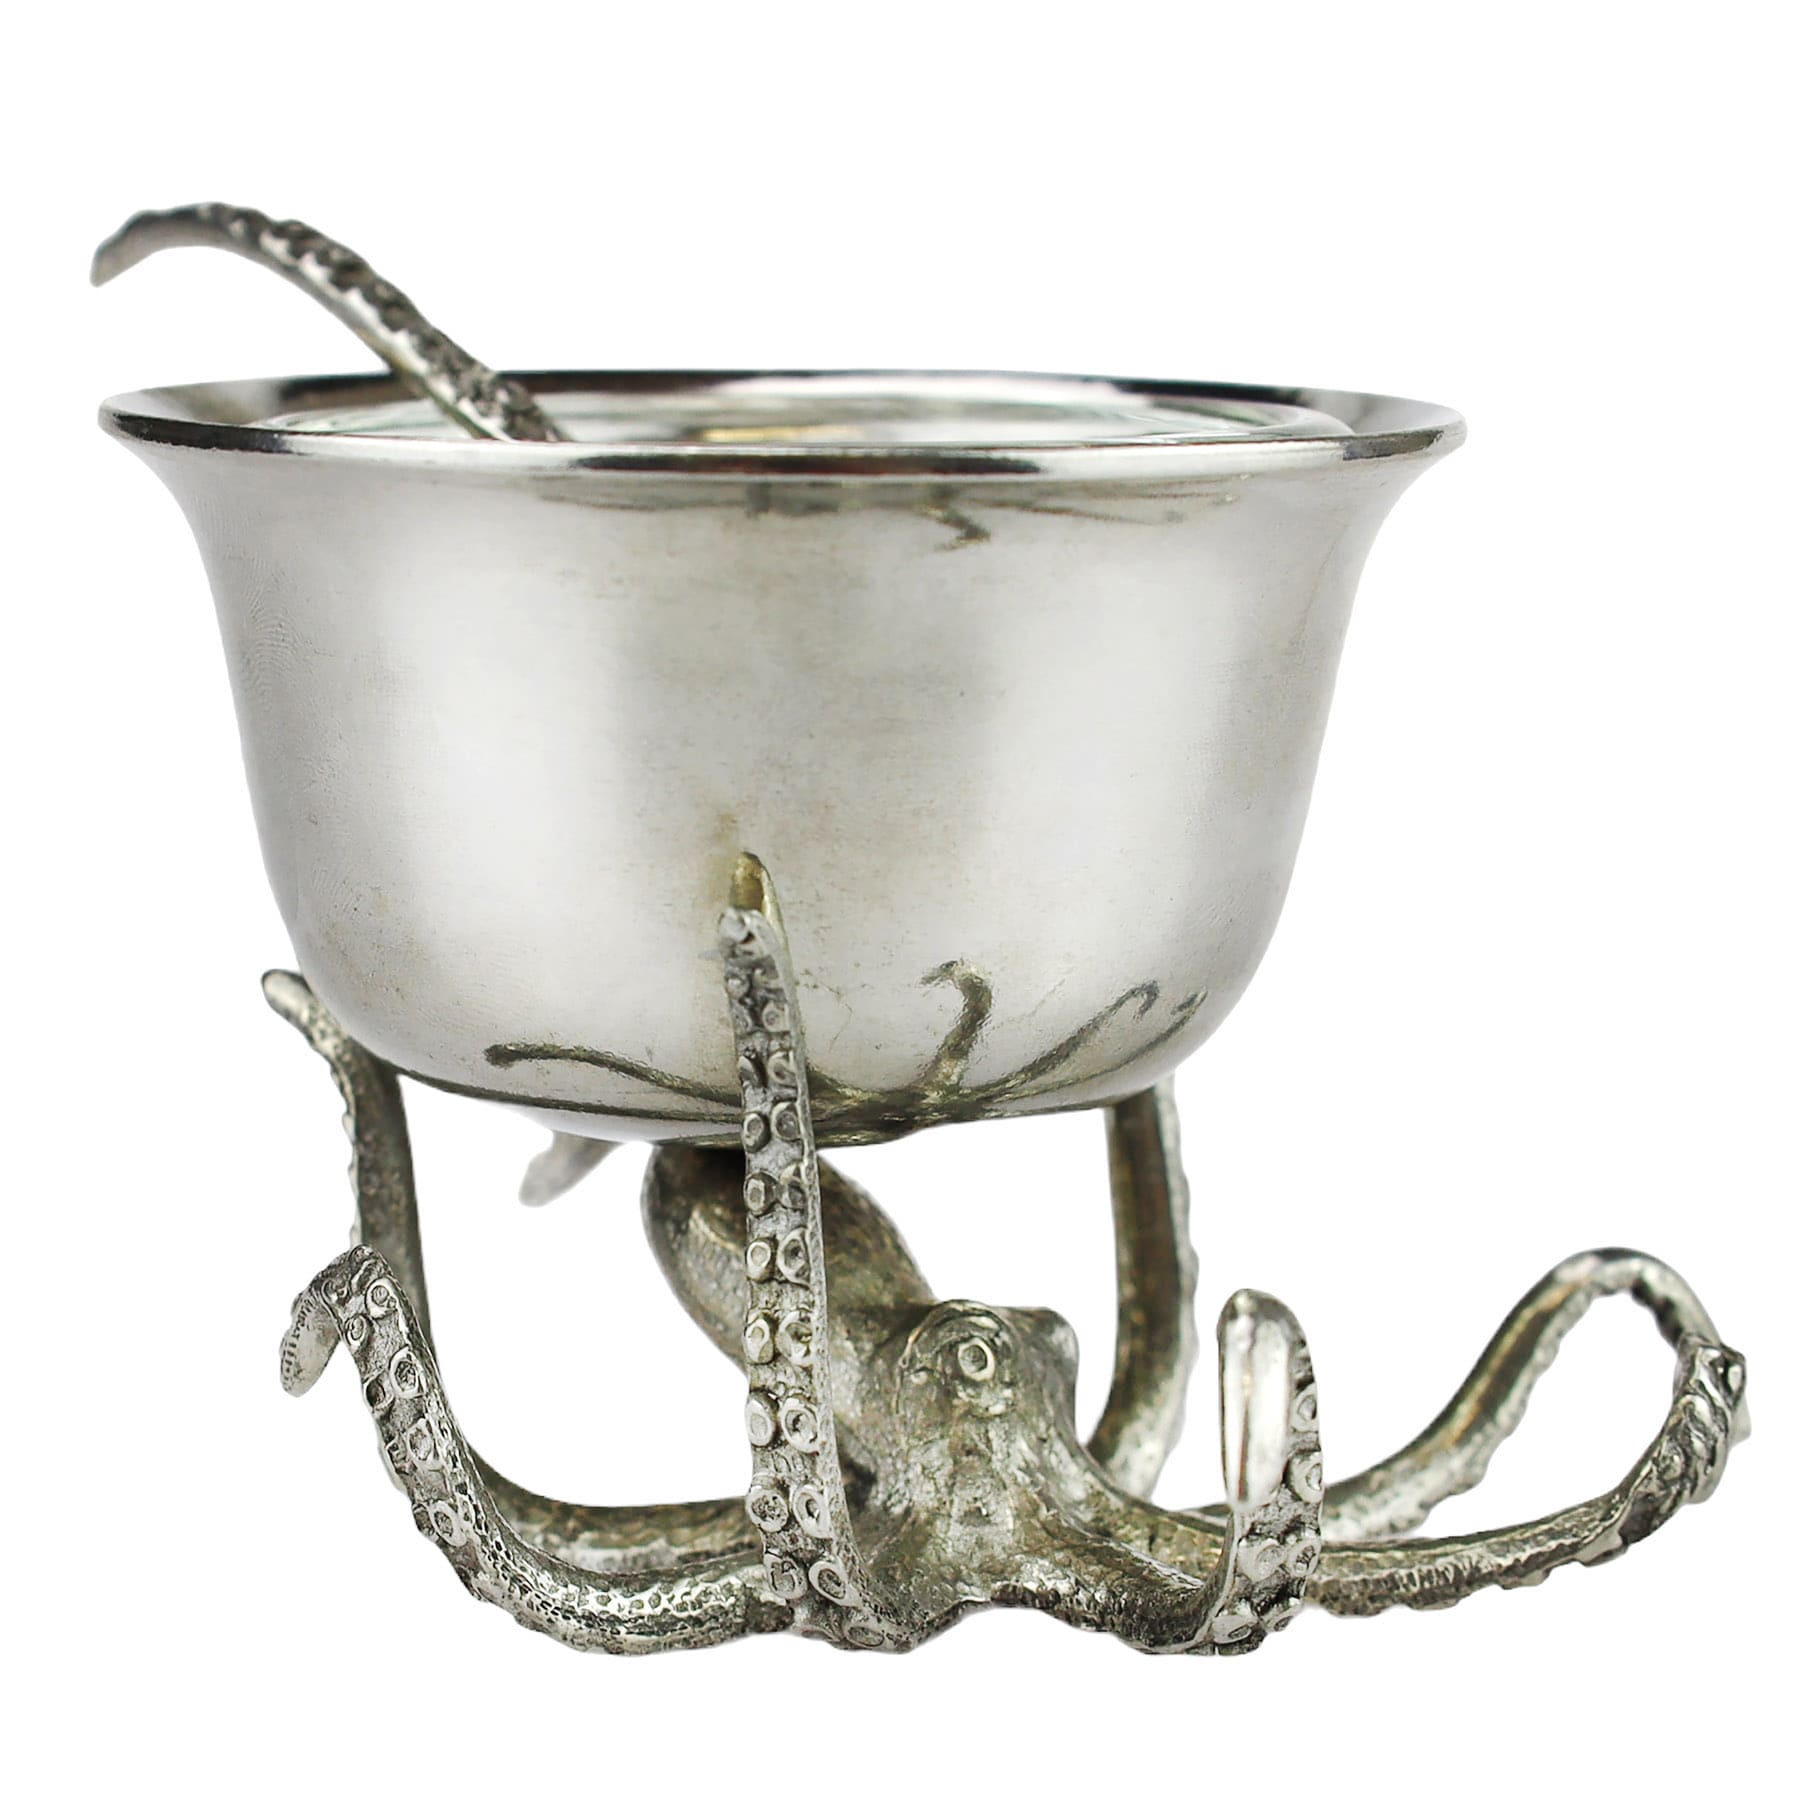 Close up of side shot of the Pewter Octopus condiment bowl with the legs shaped as tentacles and a spoon shaped like a tentacle